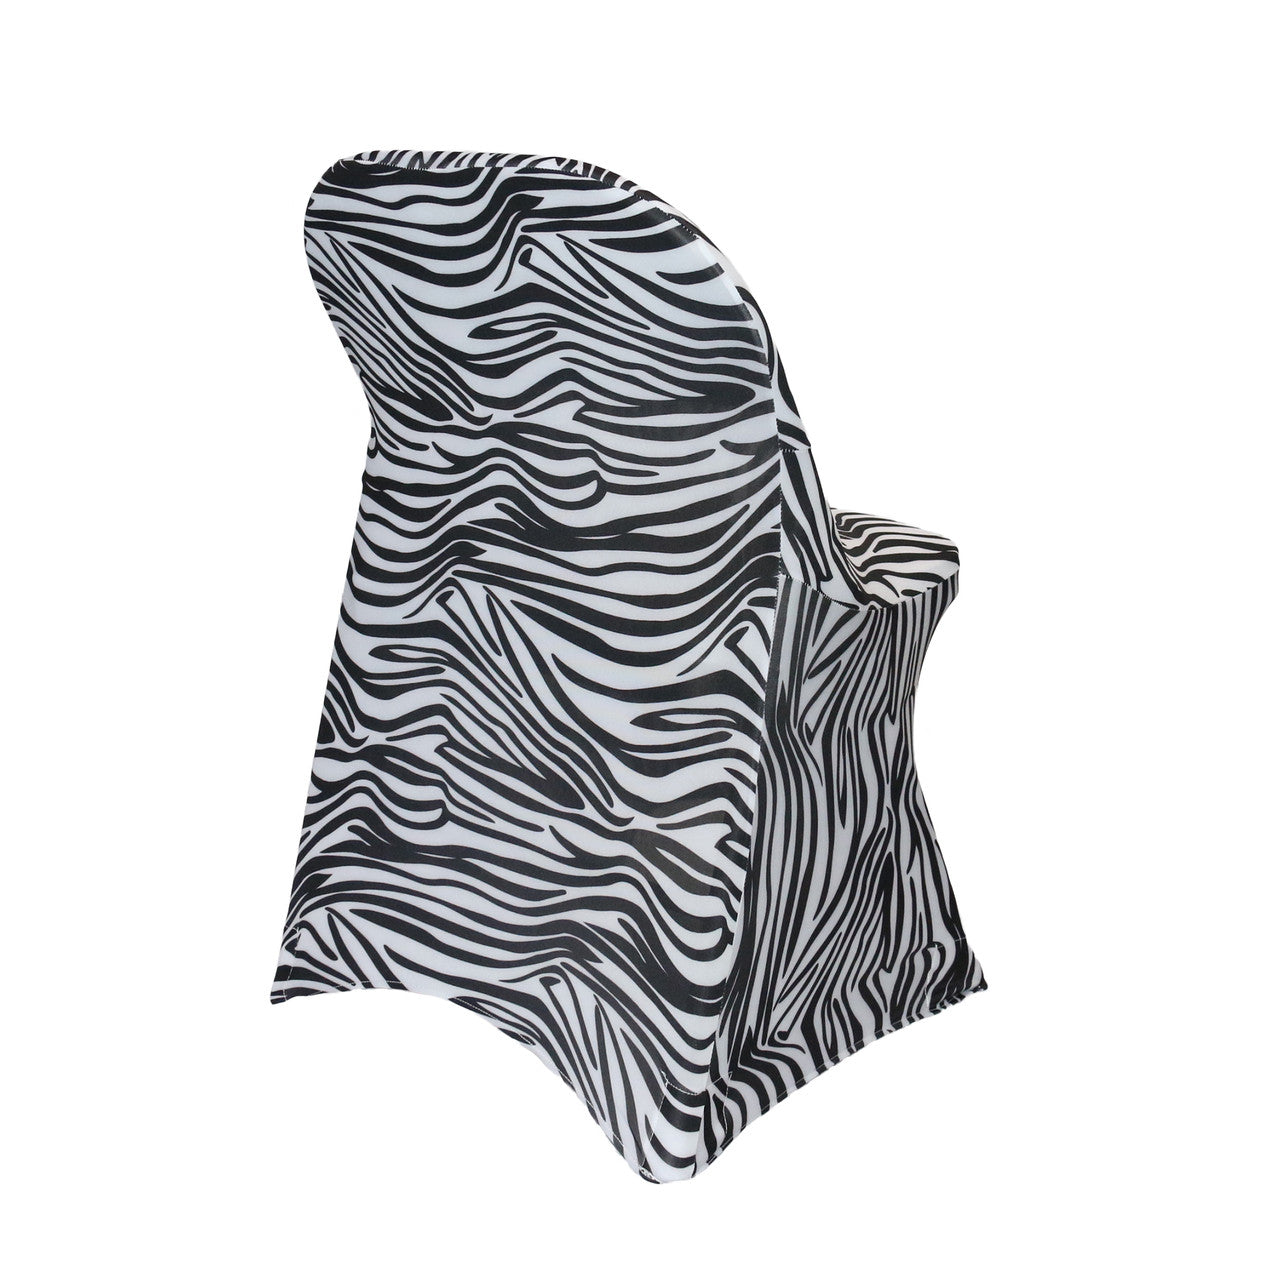 Print Spandex Folding Chair Cover in Black and White Striped